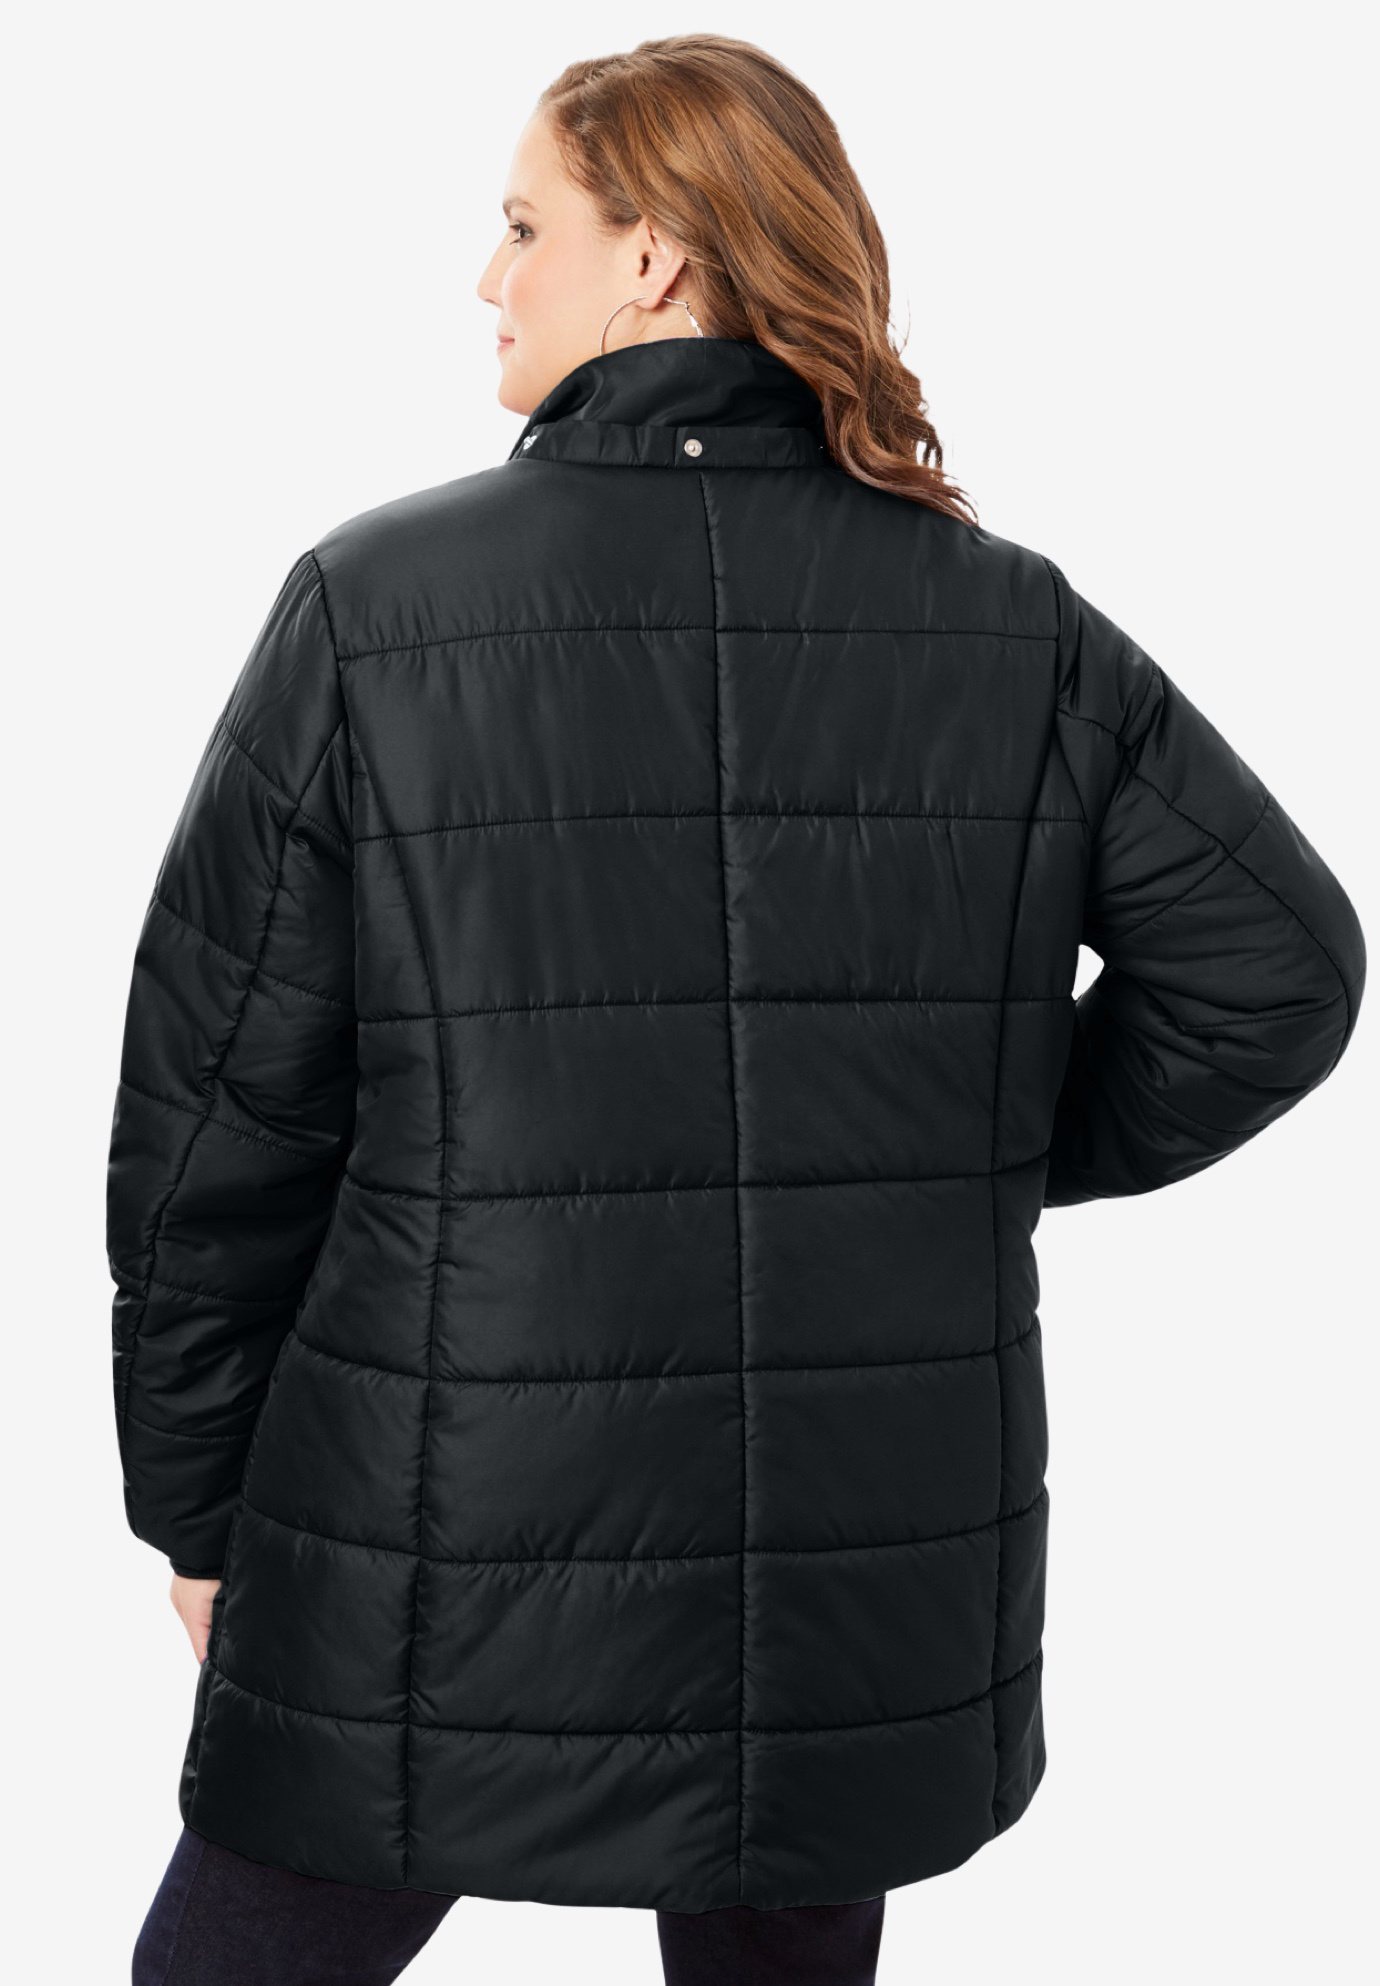 Roaman's Women's Plus Size Classic-Length Quilted Puffer Jacket Winter Coat - image 4 of 6